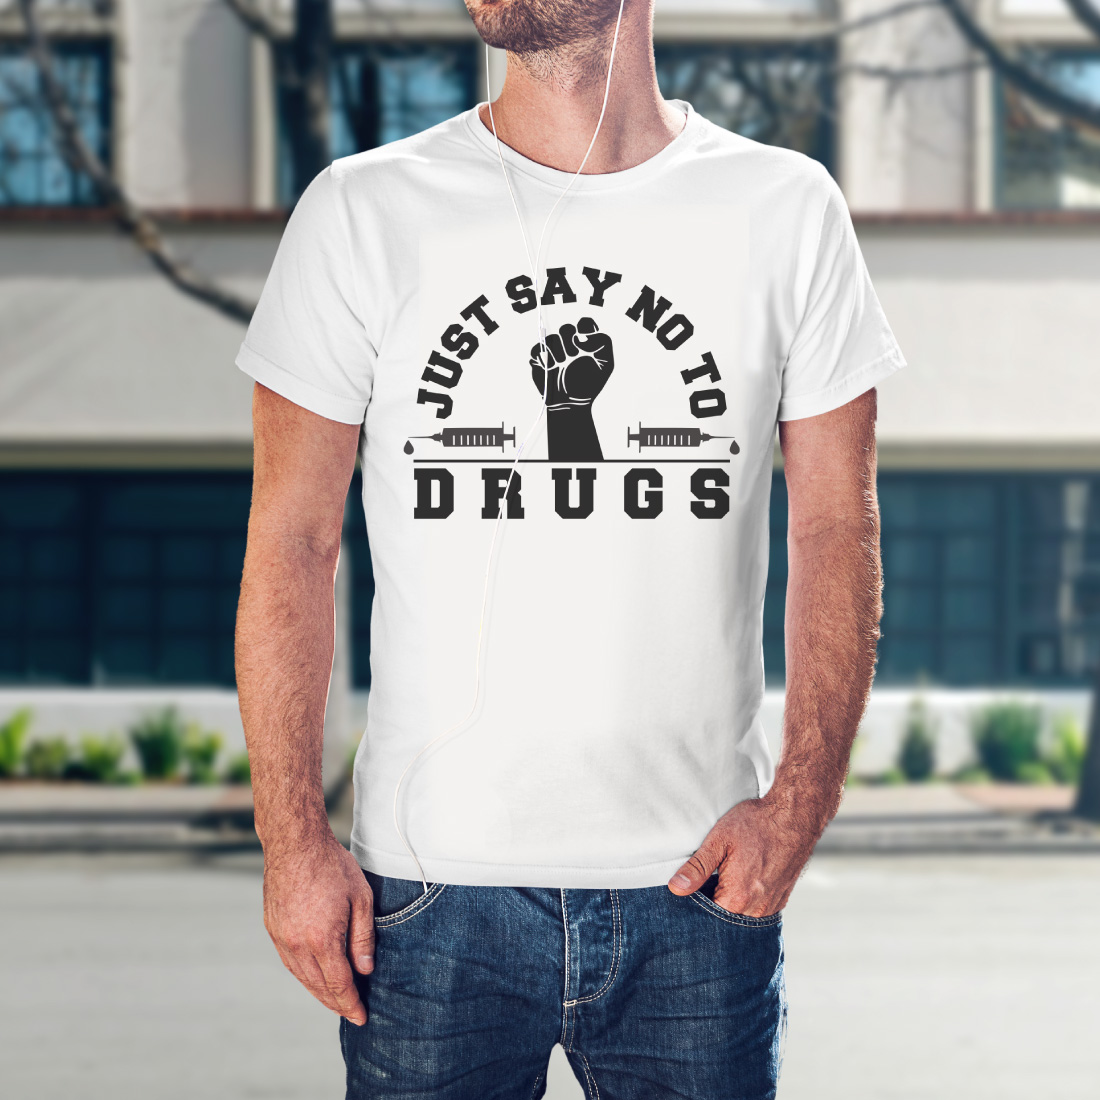 Just say no to drugs tshirt design cover image.